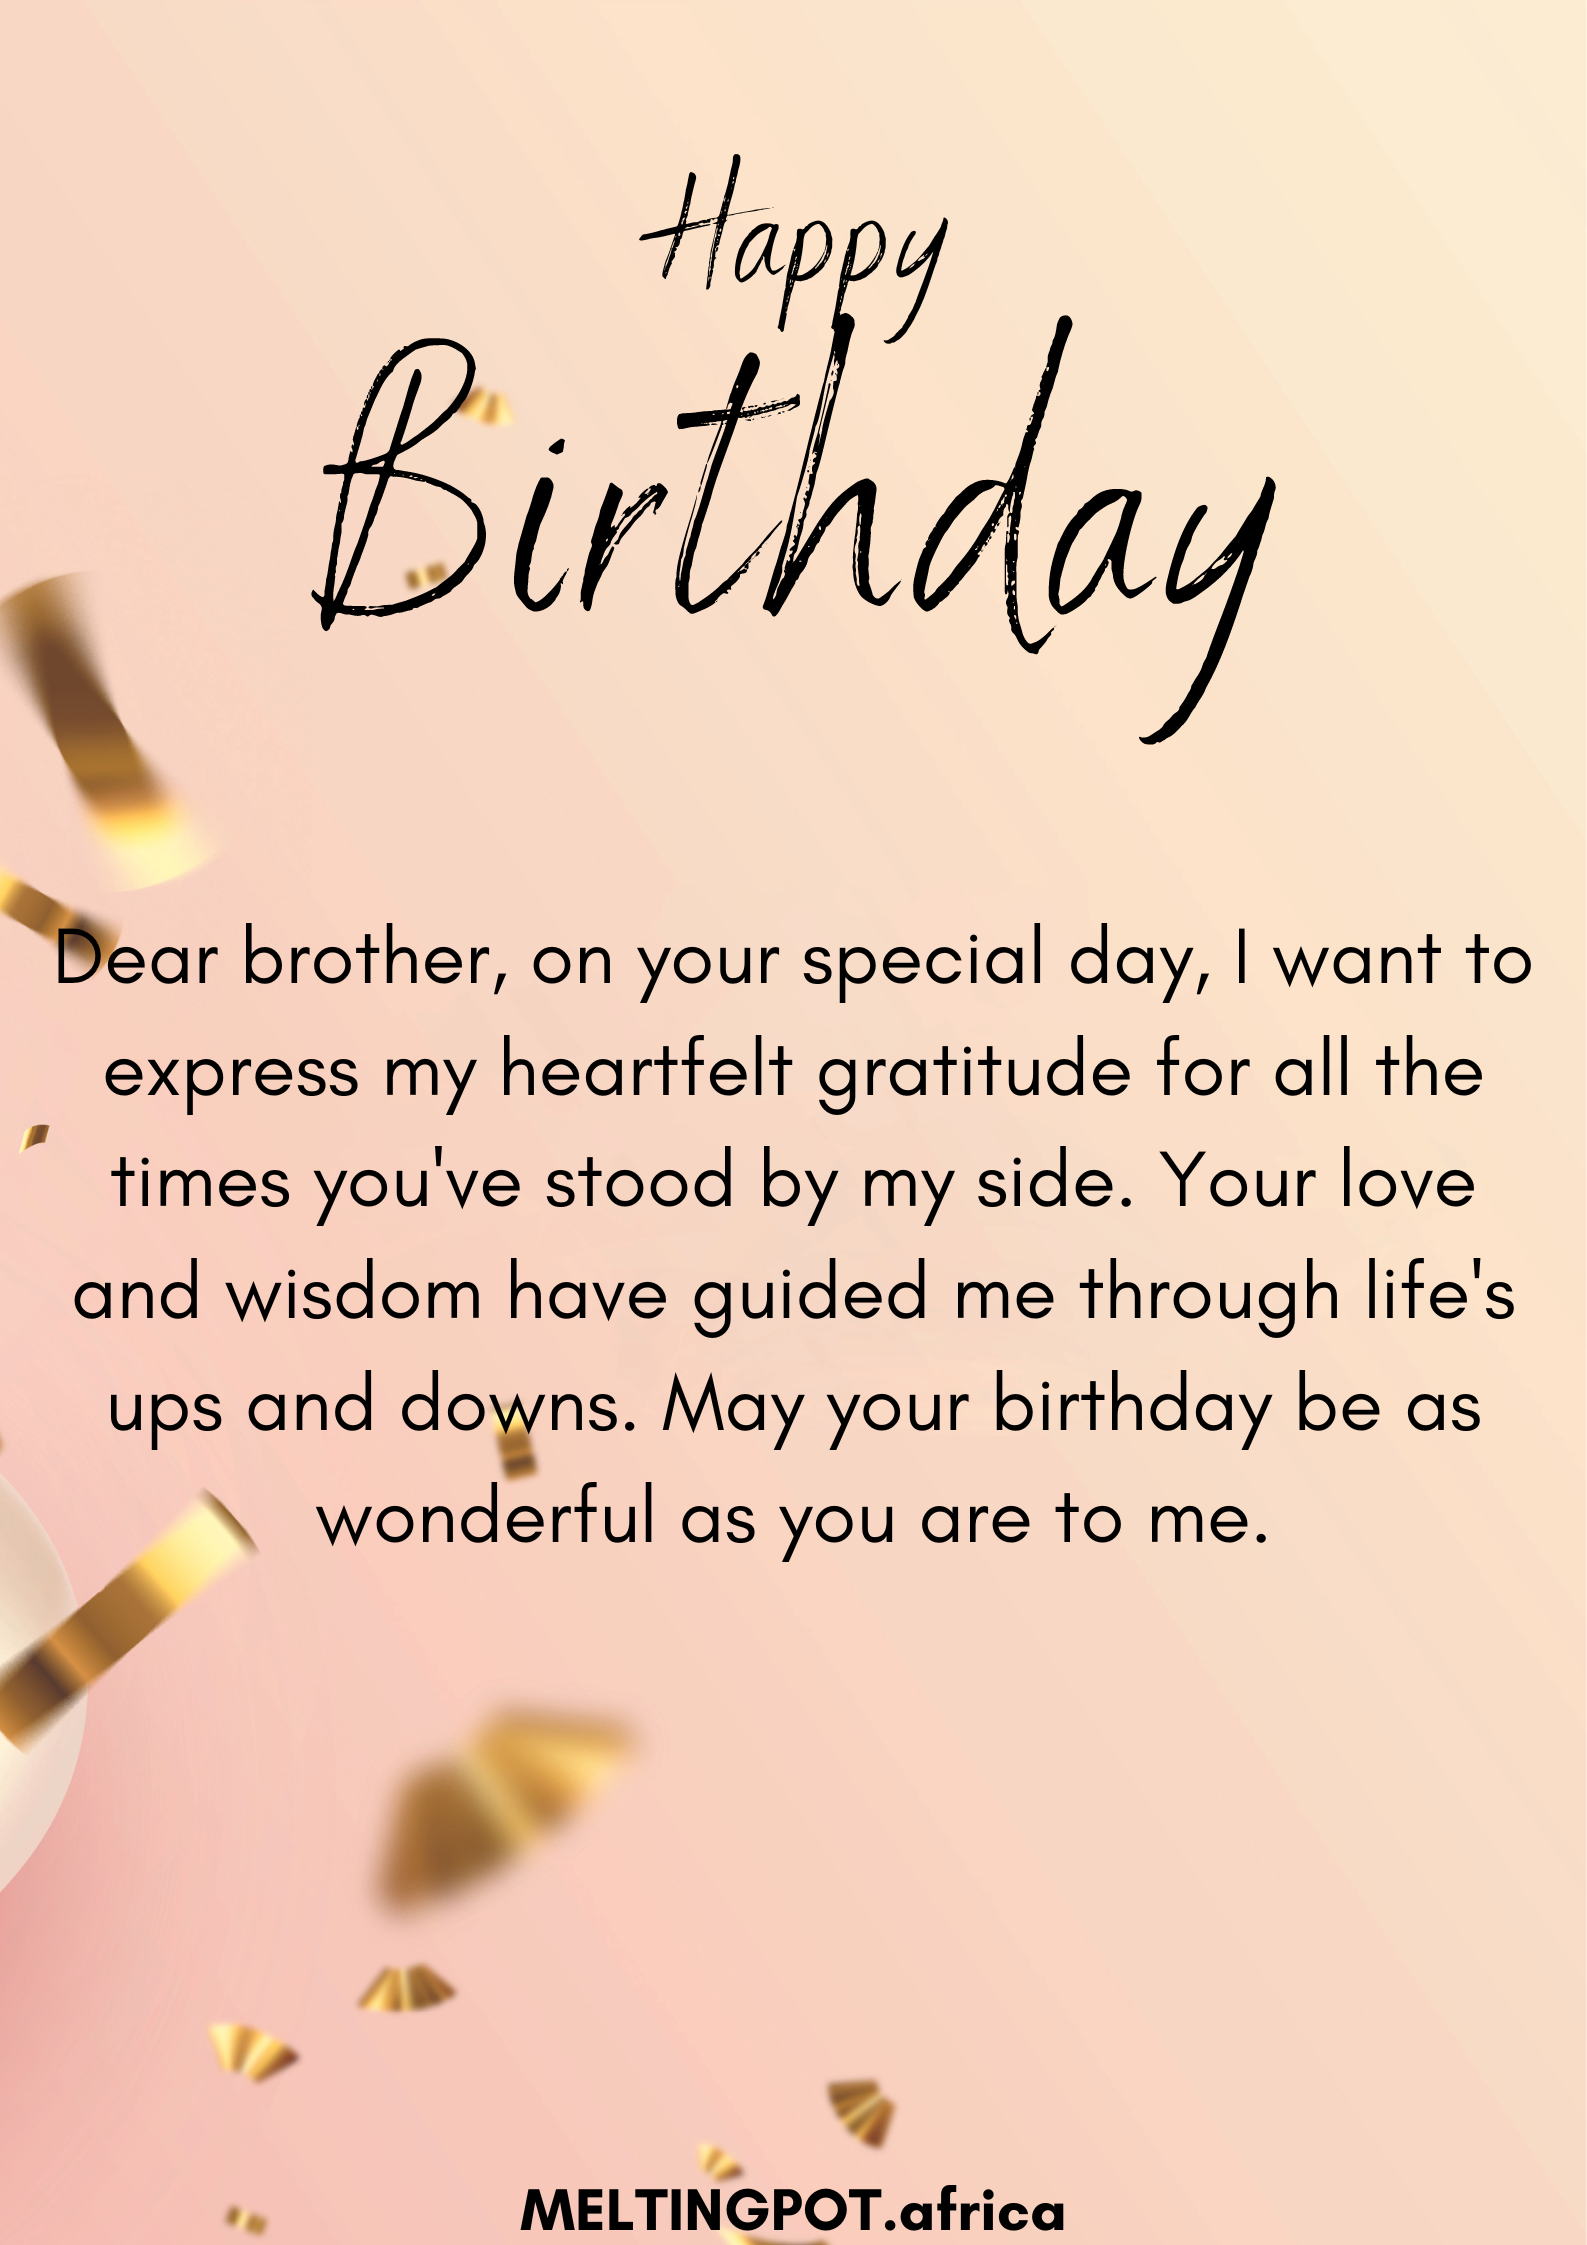 Dear brother, on your special day, I want to express my heartfelt gratitude for all the times you've stood by my side. Your love and wisdom have guided me through life's ups and downs. May your birthday be as wonderful as you are to me.